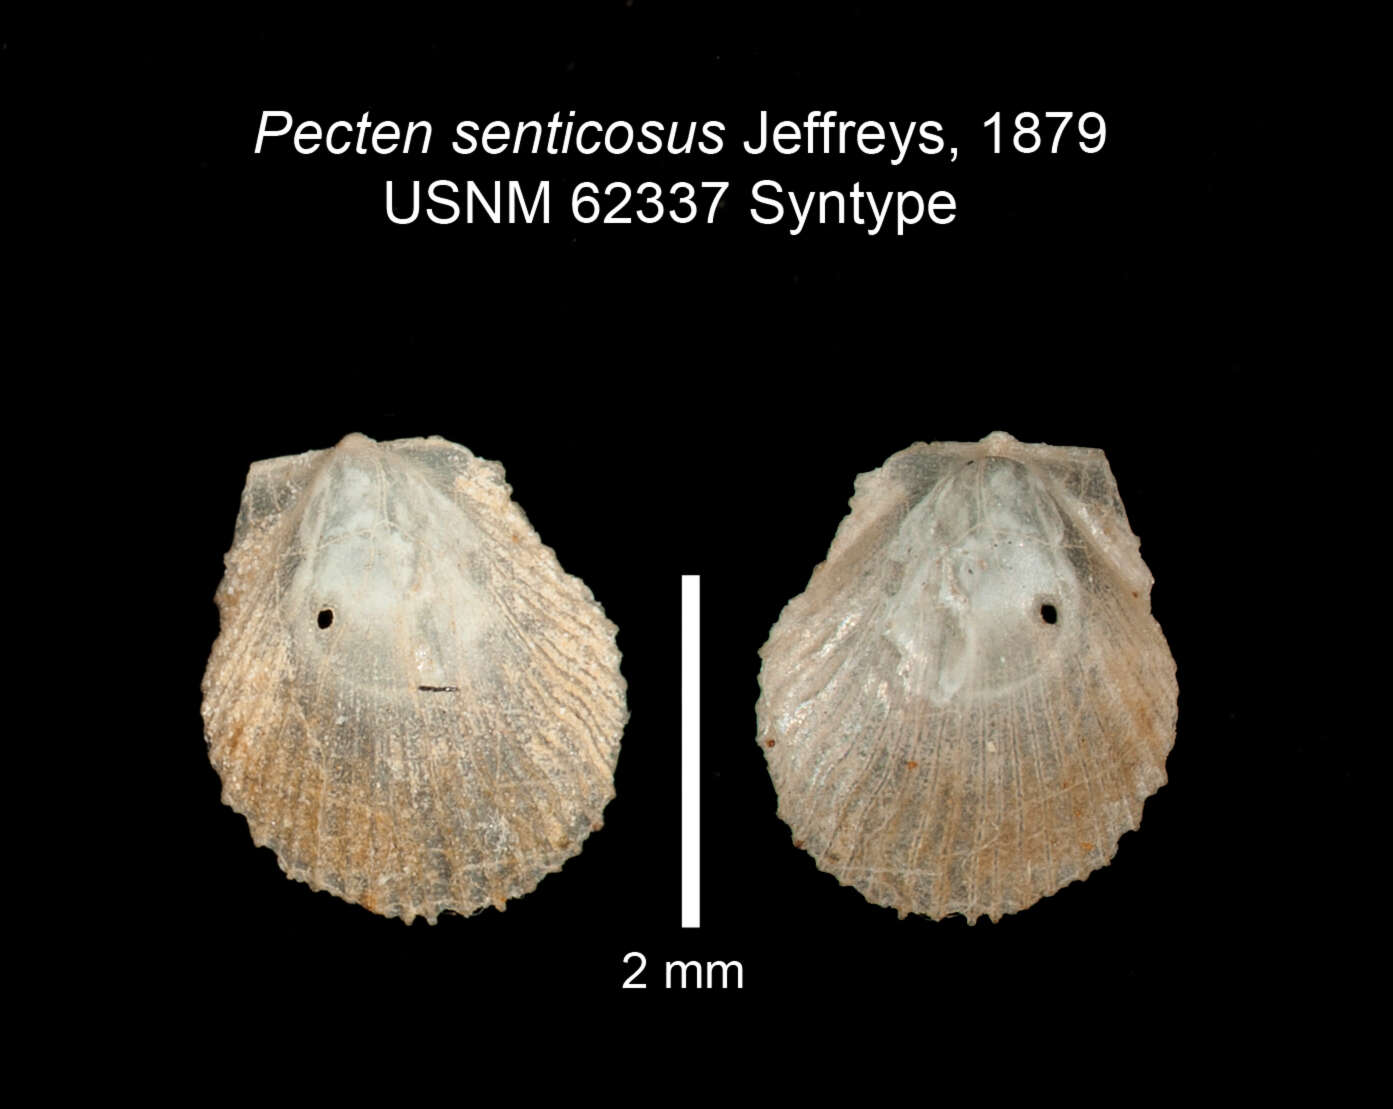 Image of hunchback scallop